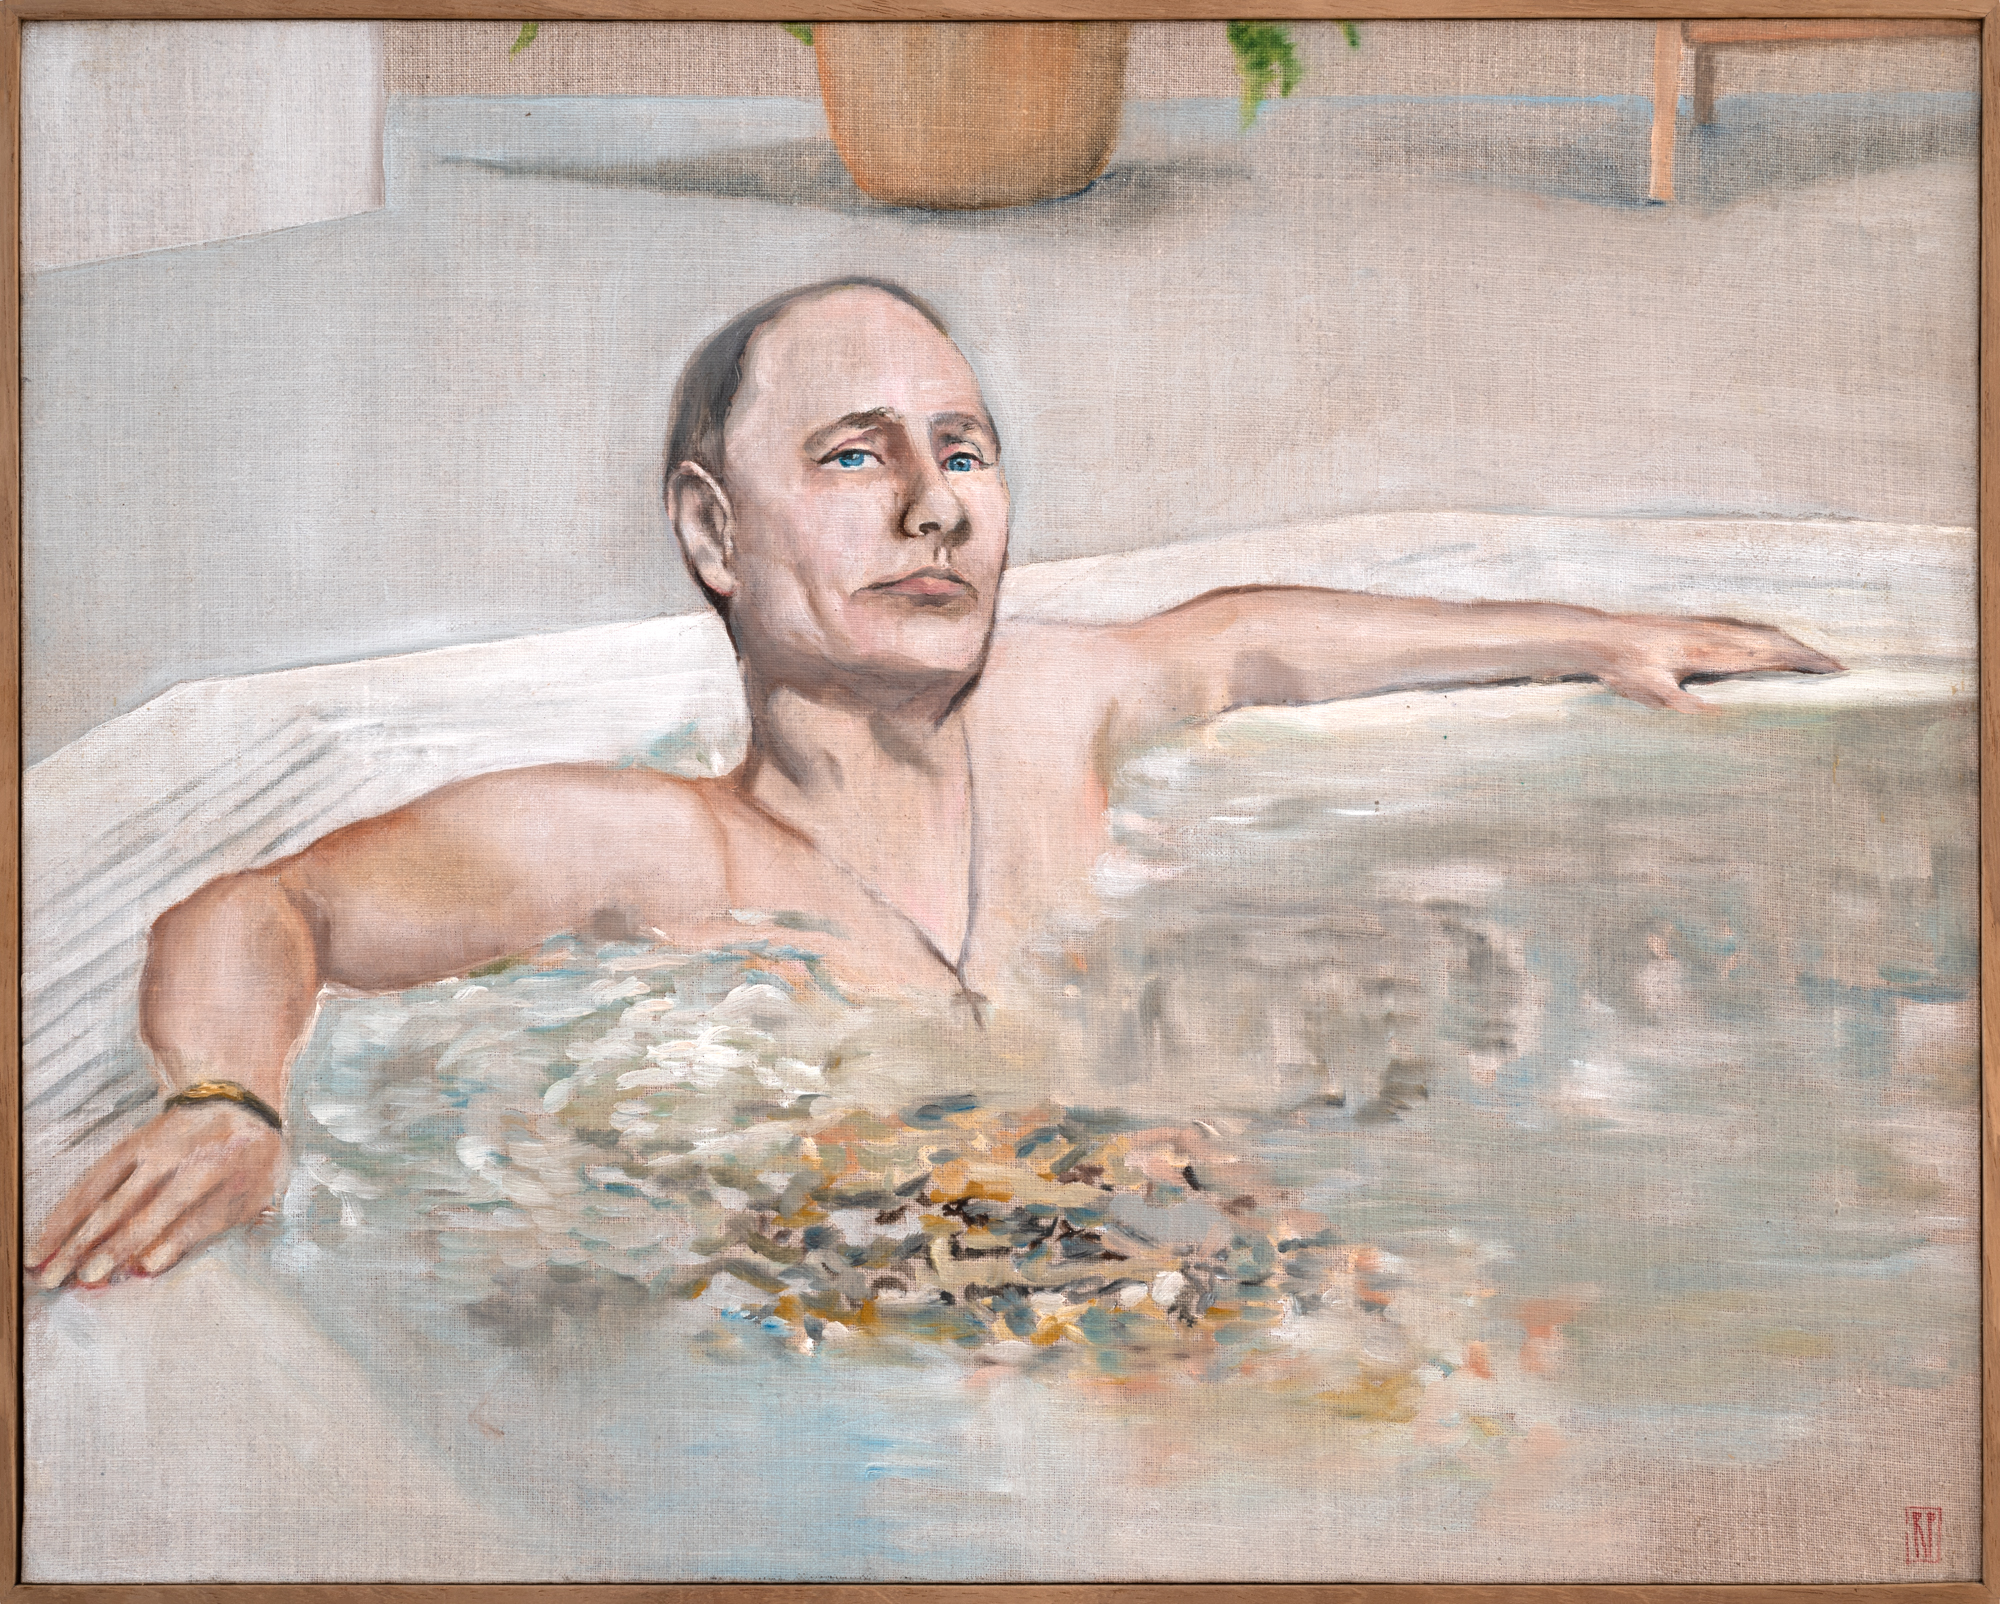 climate denier; climate sceptic; climate change; world leaders sleeping on the job; fossil fuels; free-trade capitalism; endless growth on a finite planet; Vladimir Putin